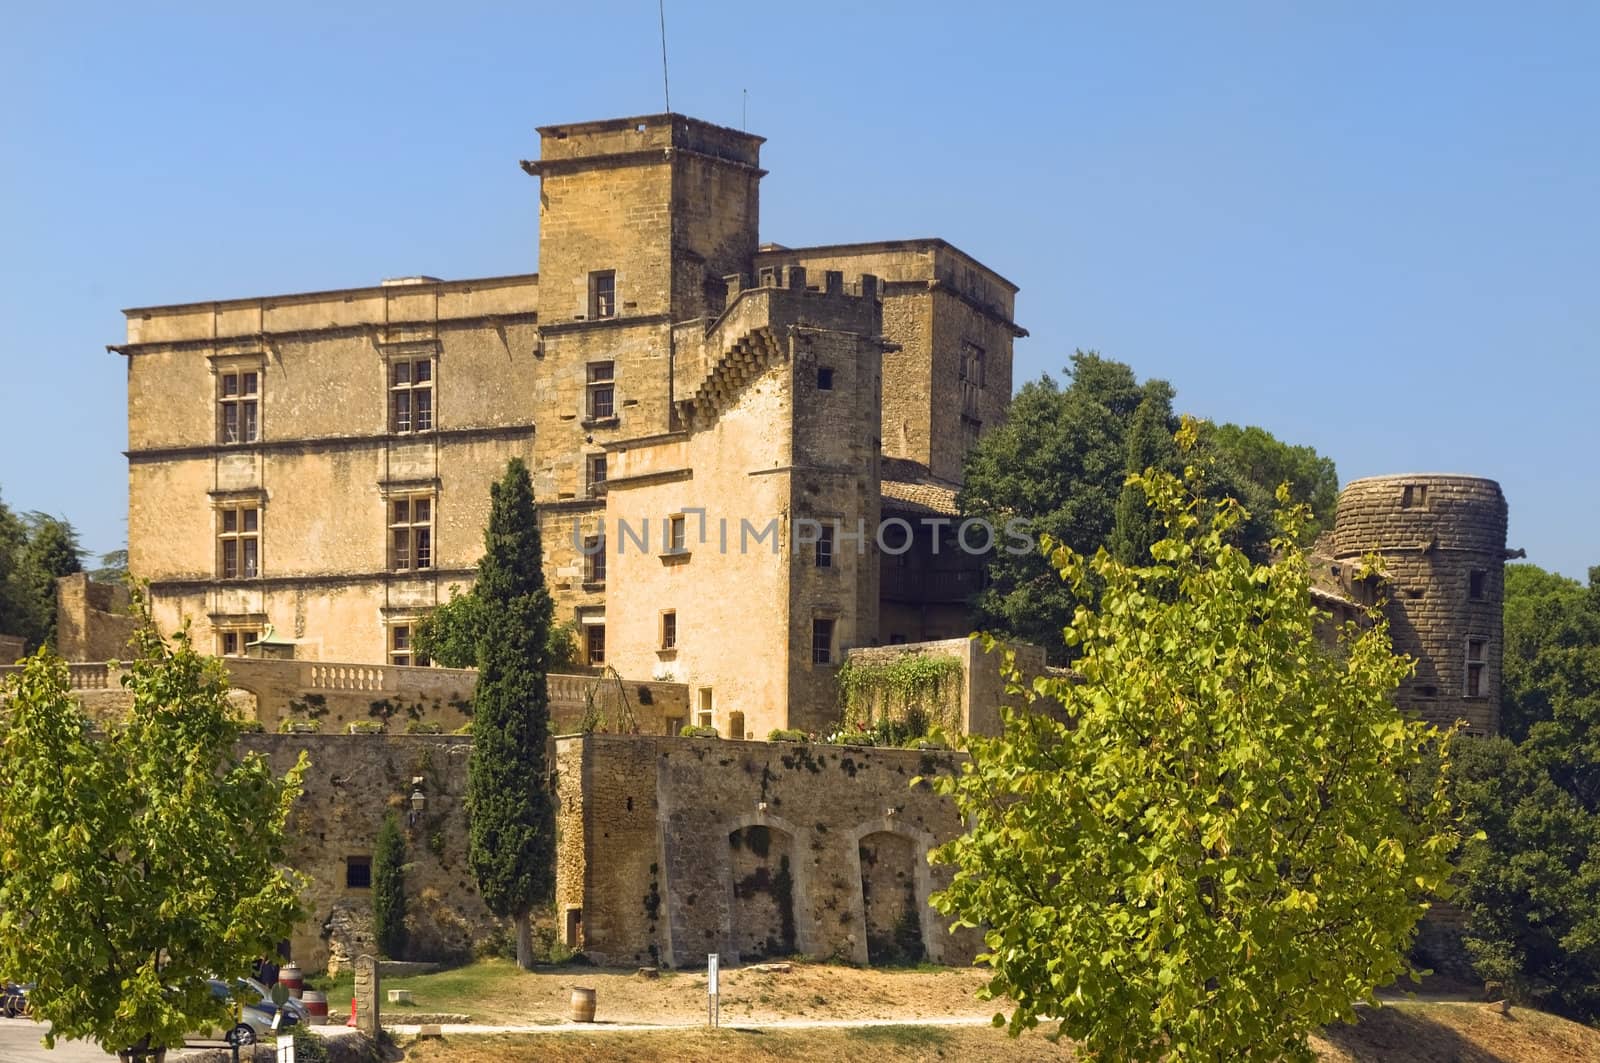 The renaissance Lourmarin Castle ( chateau de lourmarin ), Provence, region of Luberon, France, built between 15th and 16th centuries